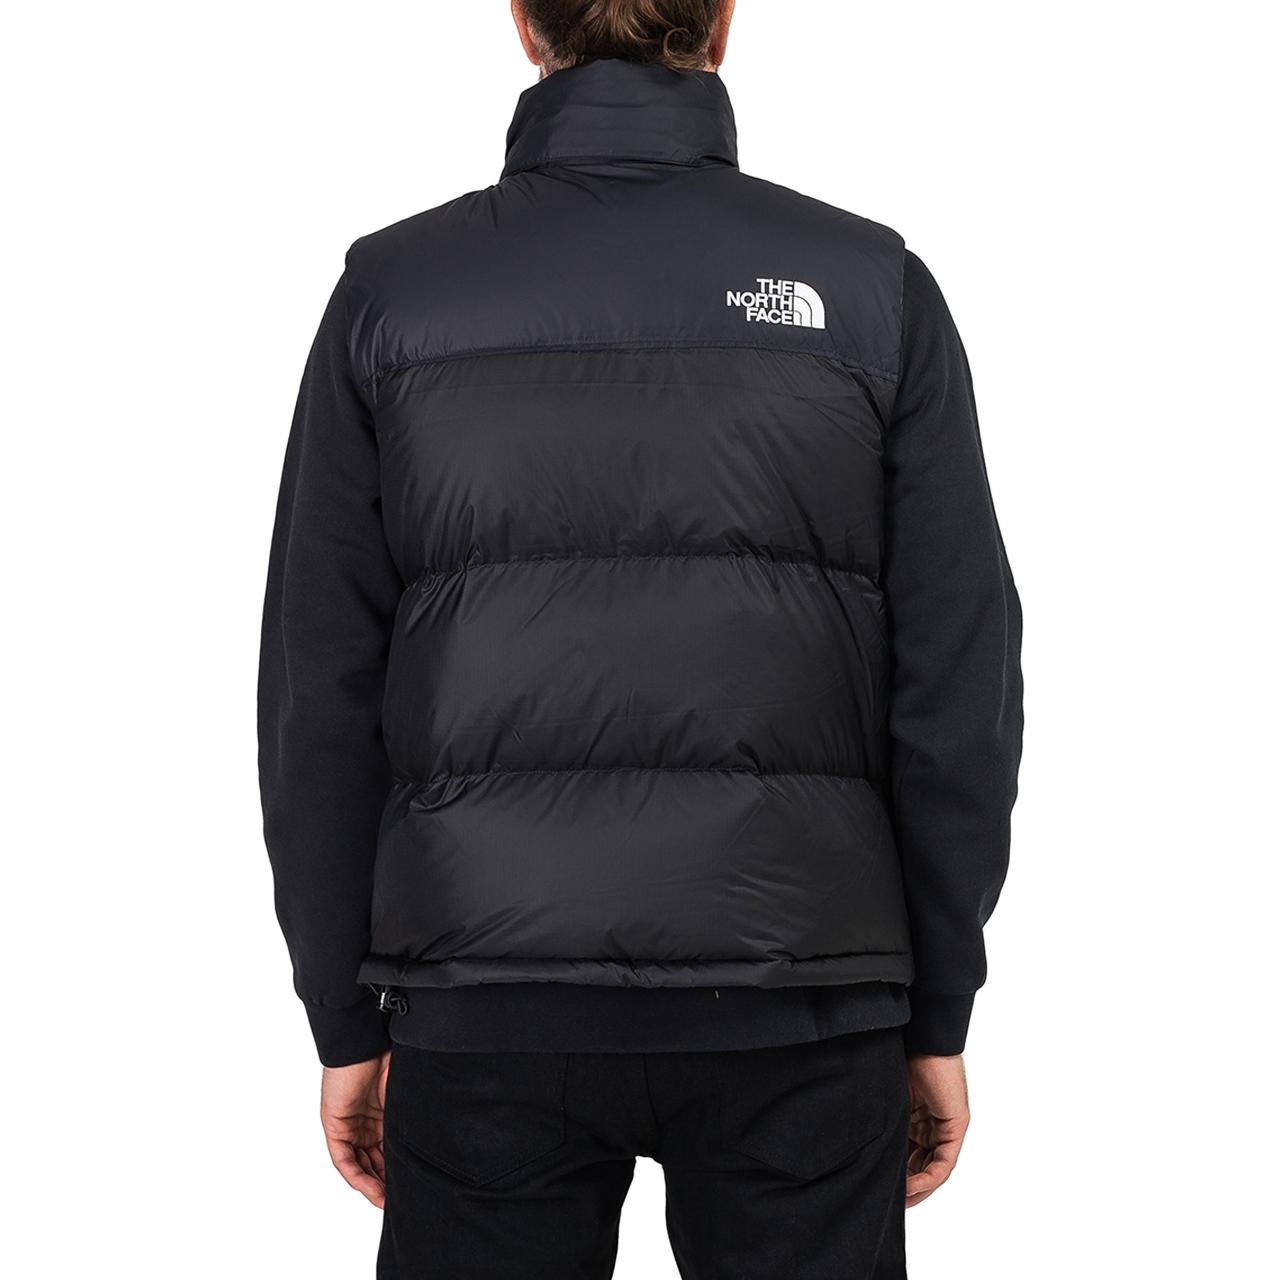 The North Face Synthetic 1996 Retro Nuptse Vest in Black for Men - Lyst